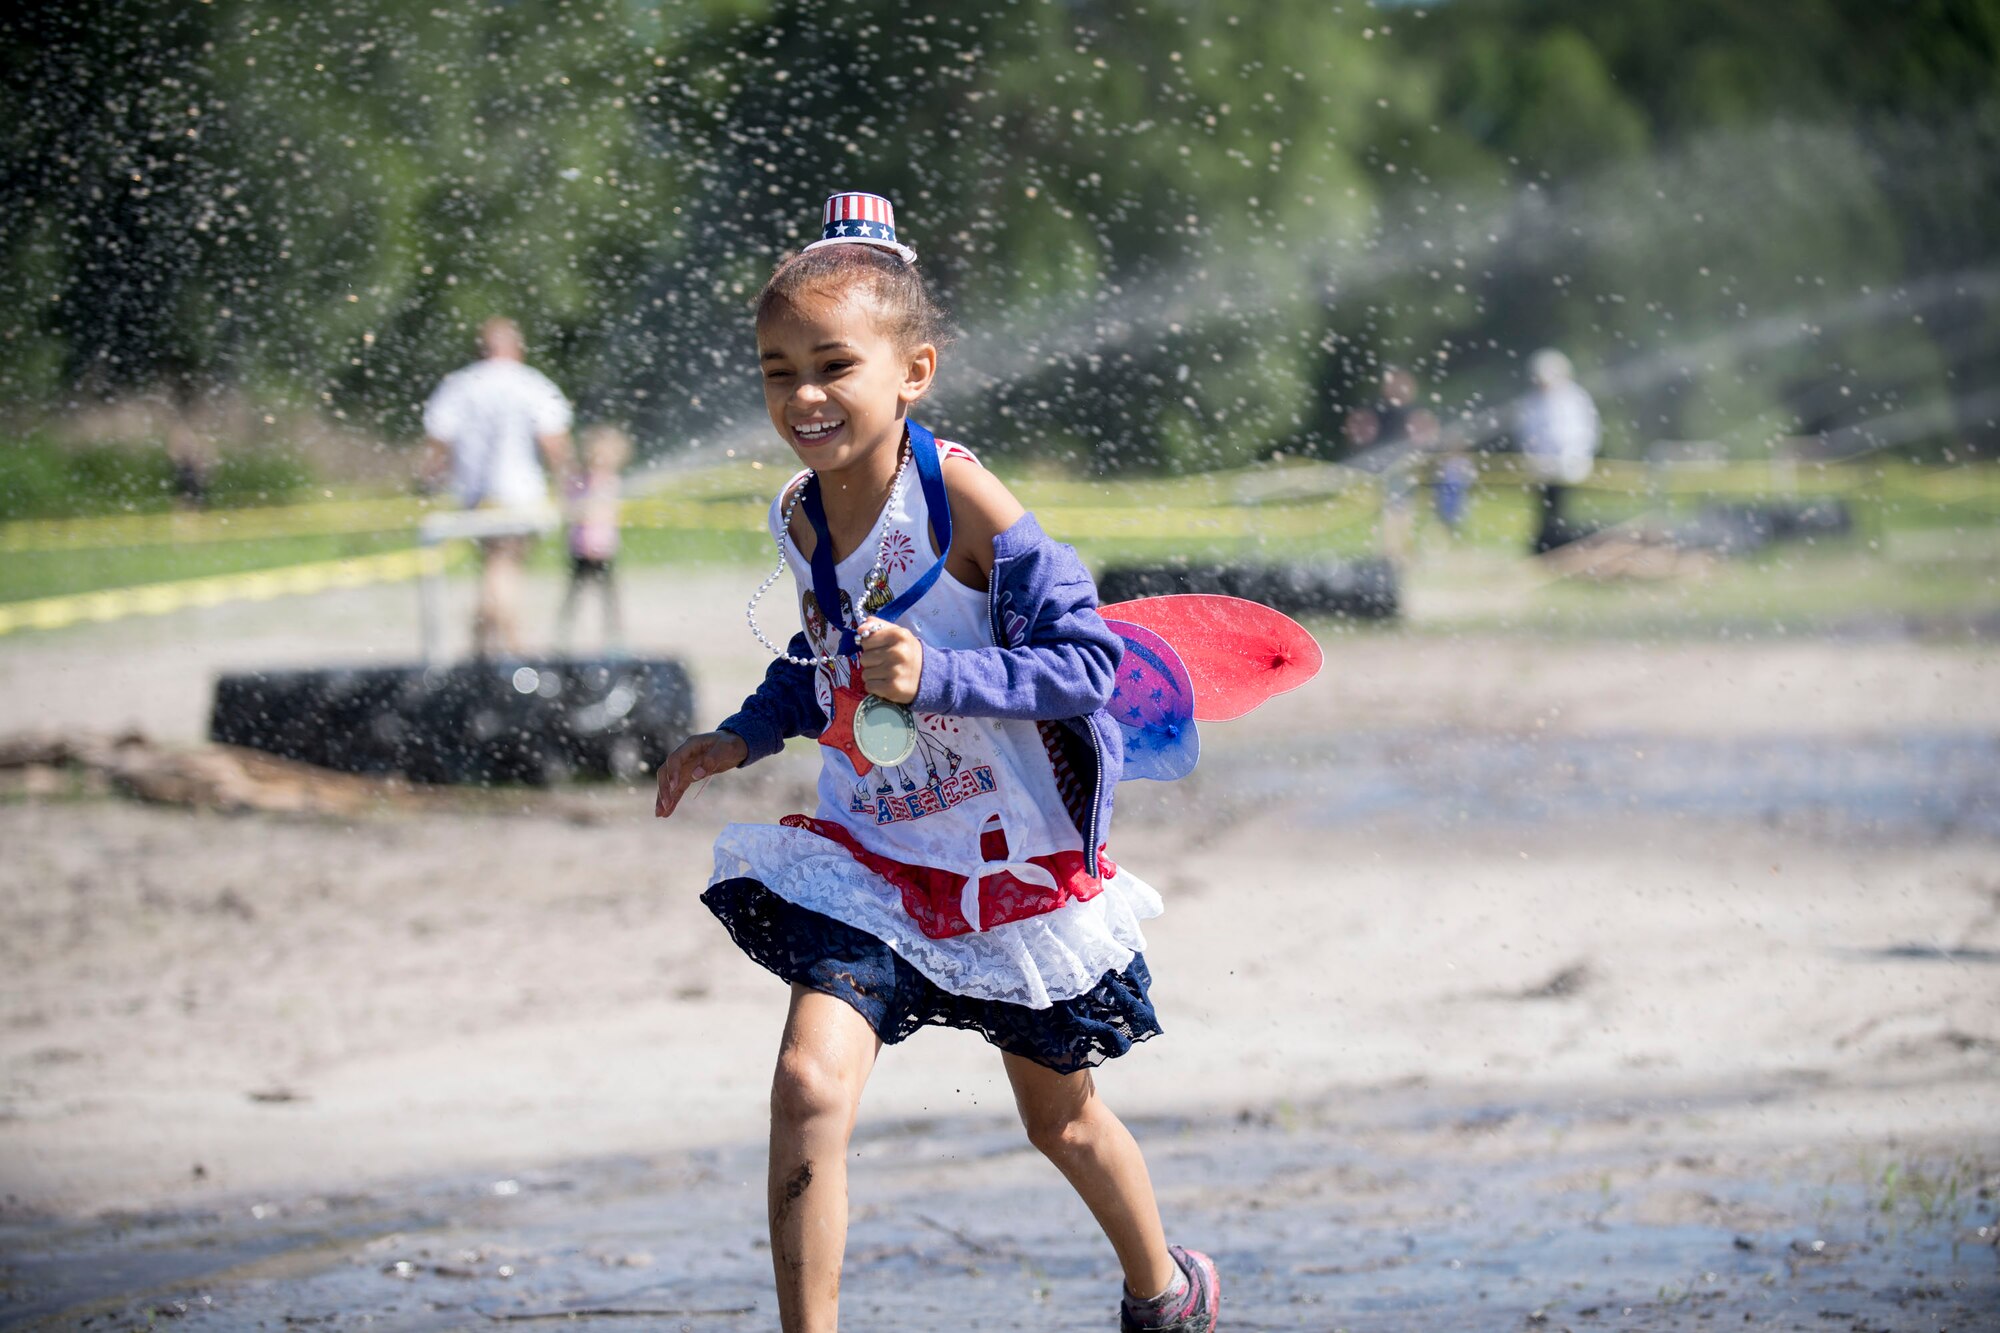 A child participant runs through water during the annual Moody Mud Run, May 6, 2017, in Ray City, Ga. The Fourth Annual Moody Mud consisted of both adult and child course that challenged more than 600 participants with obstacles over 4.2 miles. (U.S. Air Force photo by Airman 1st Class Daniel Snider)